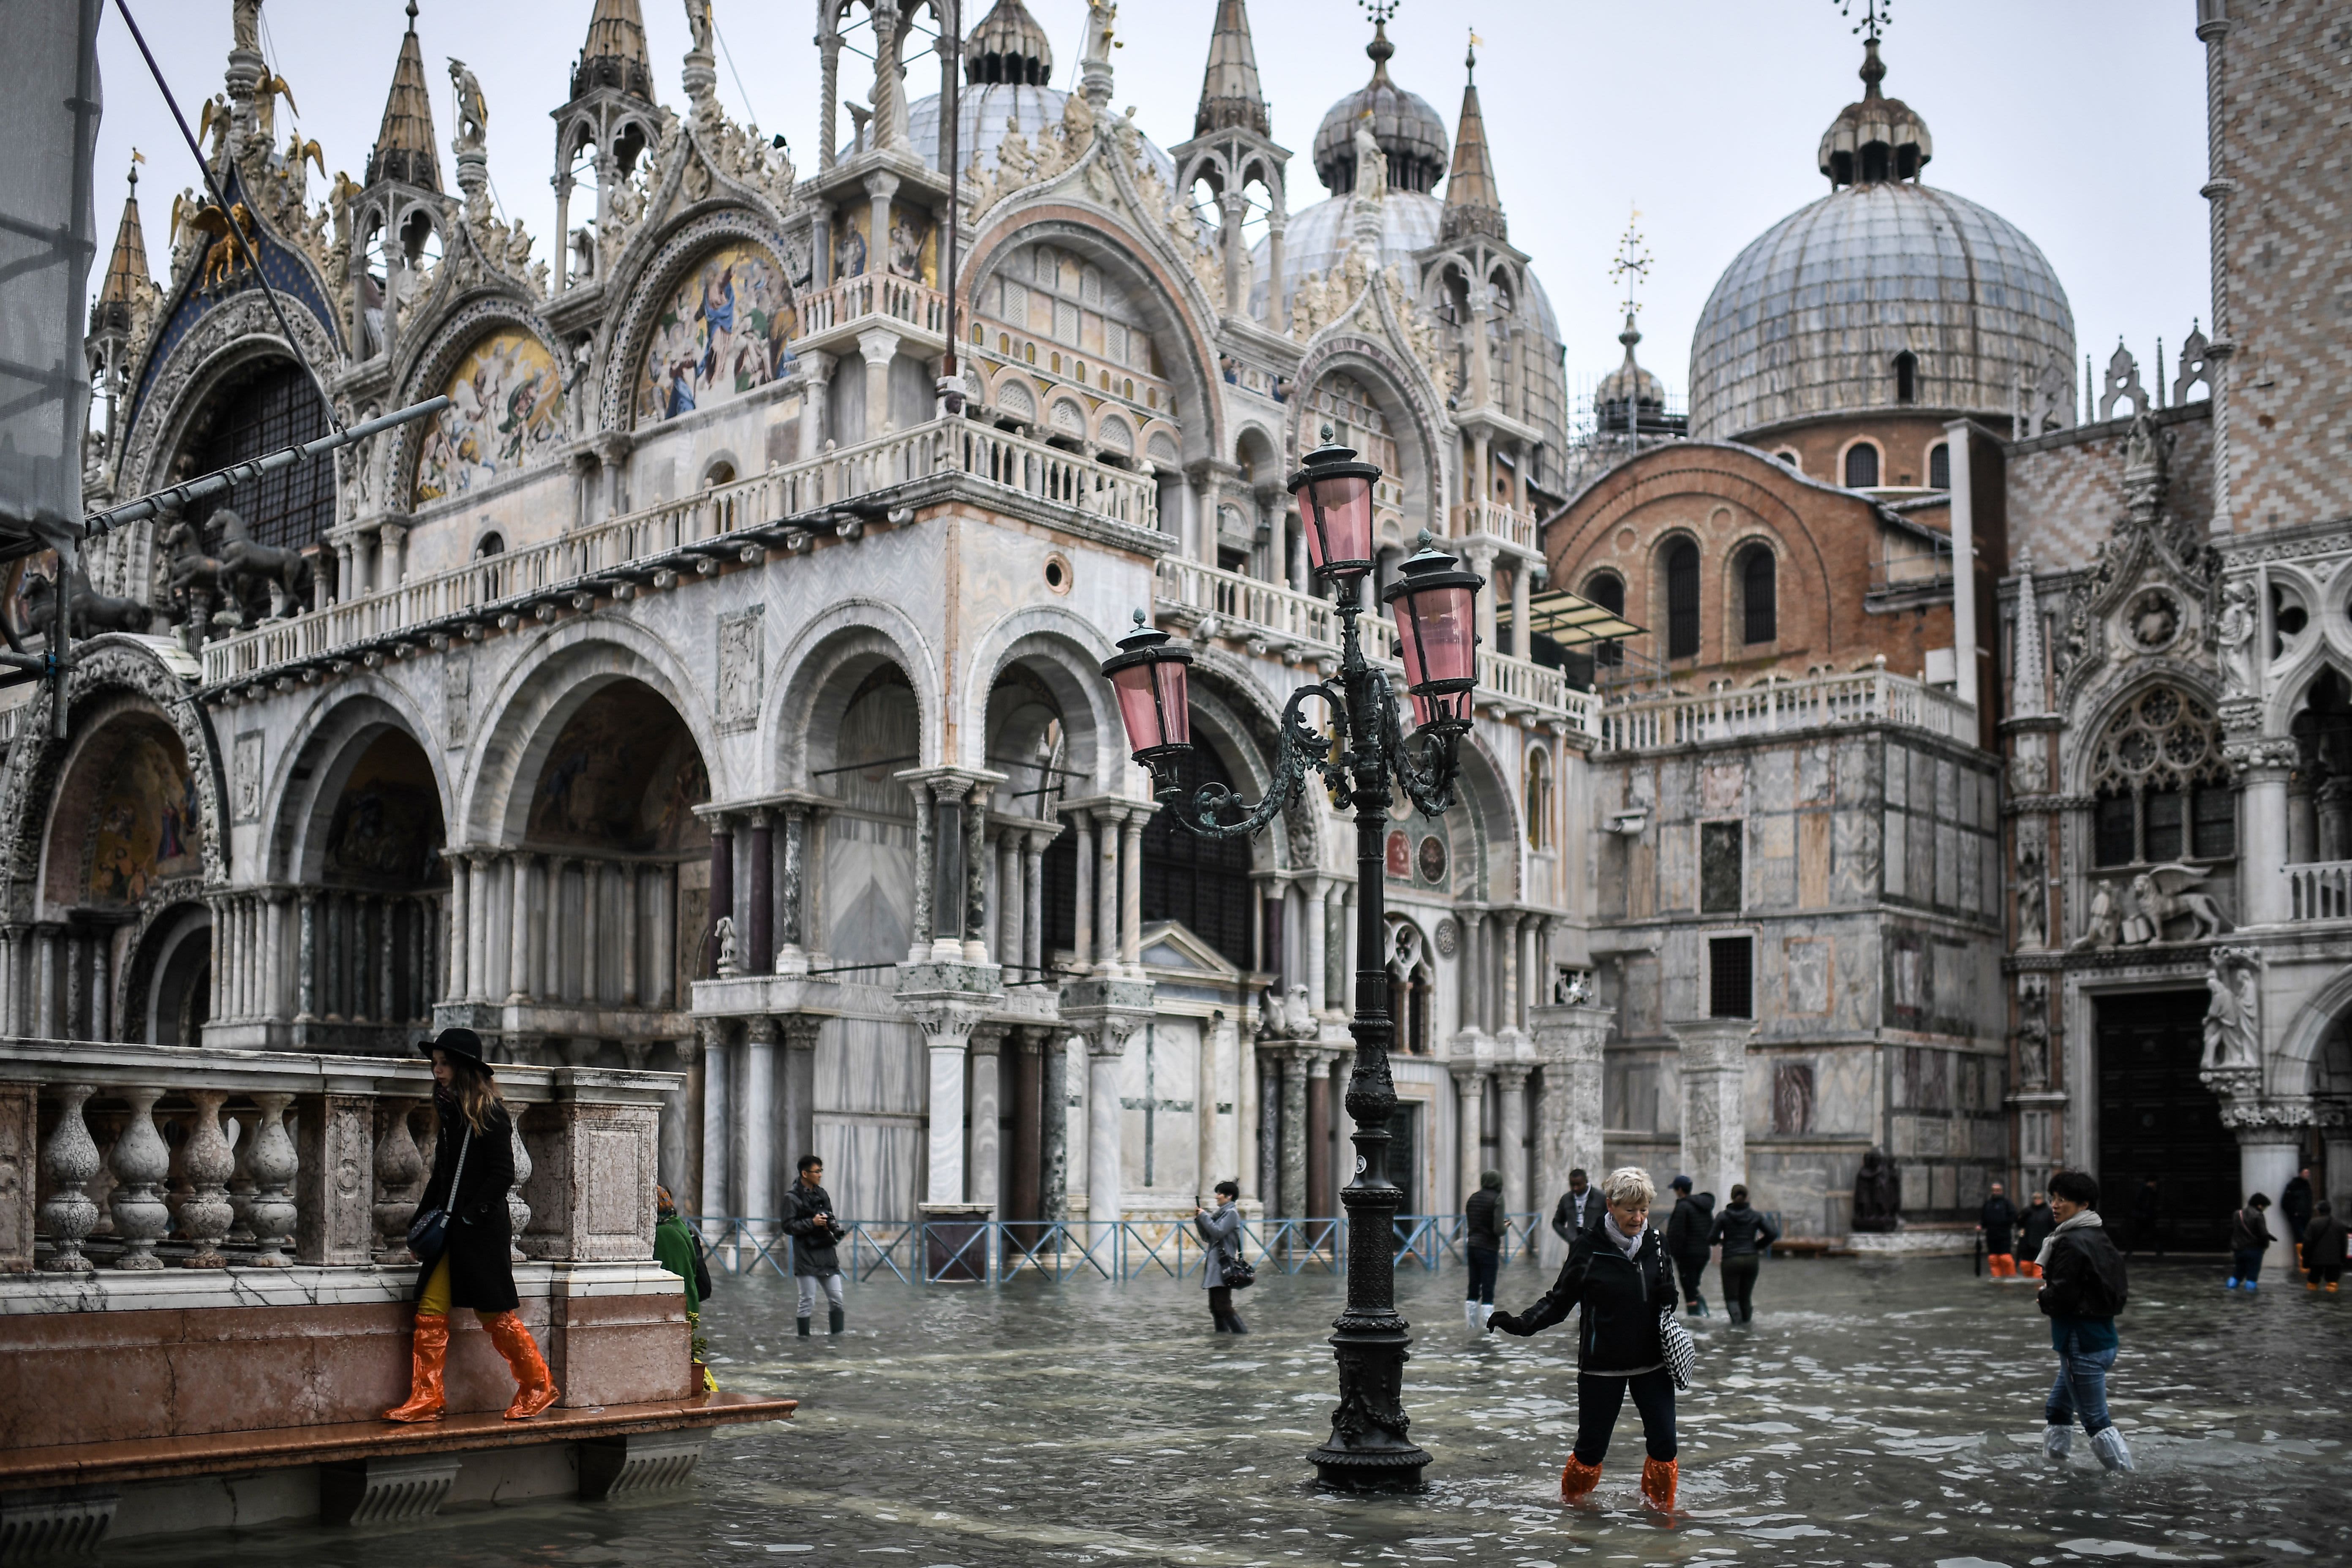 Climate change blamed as floods overwhelm Venice, swamping basilica and squares - CNBC